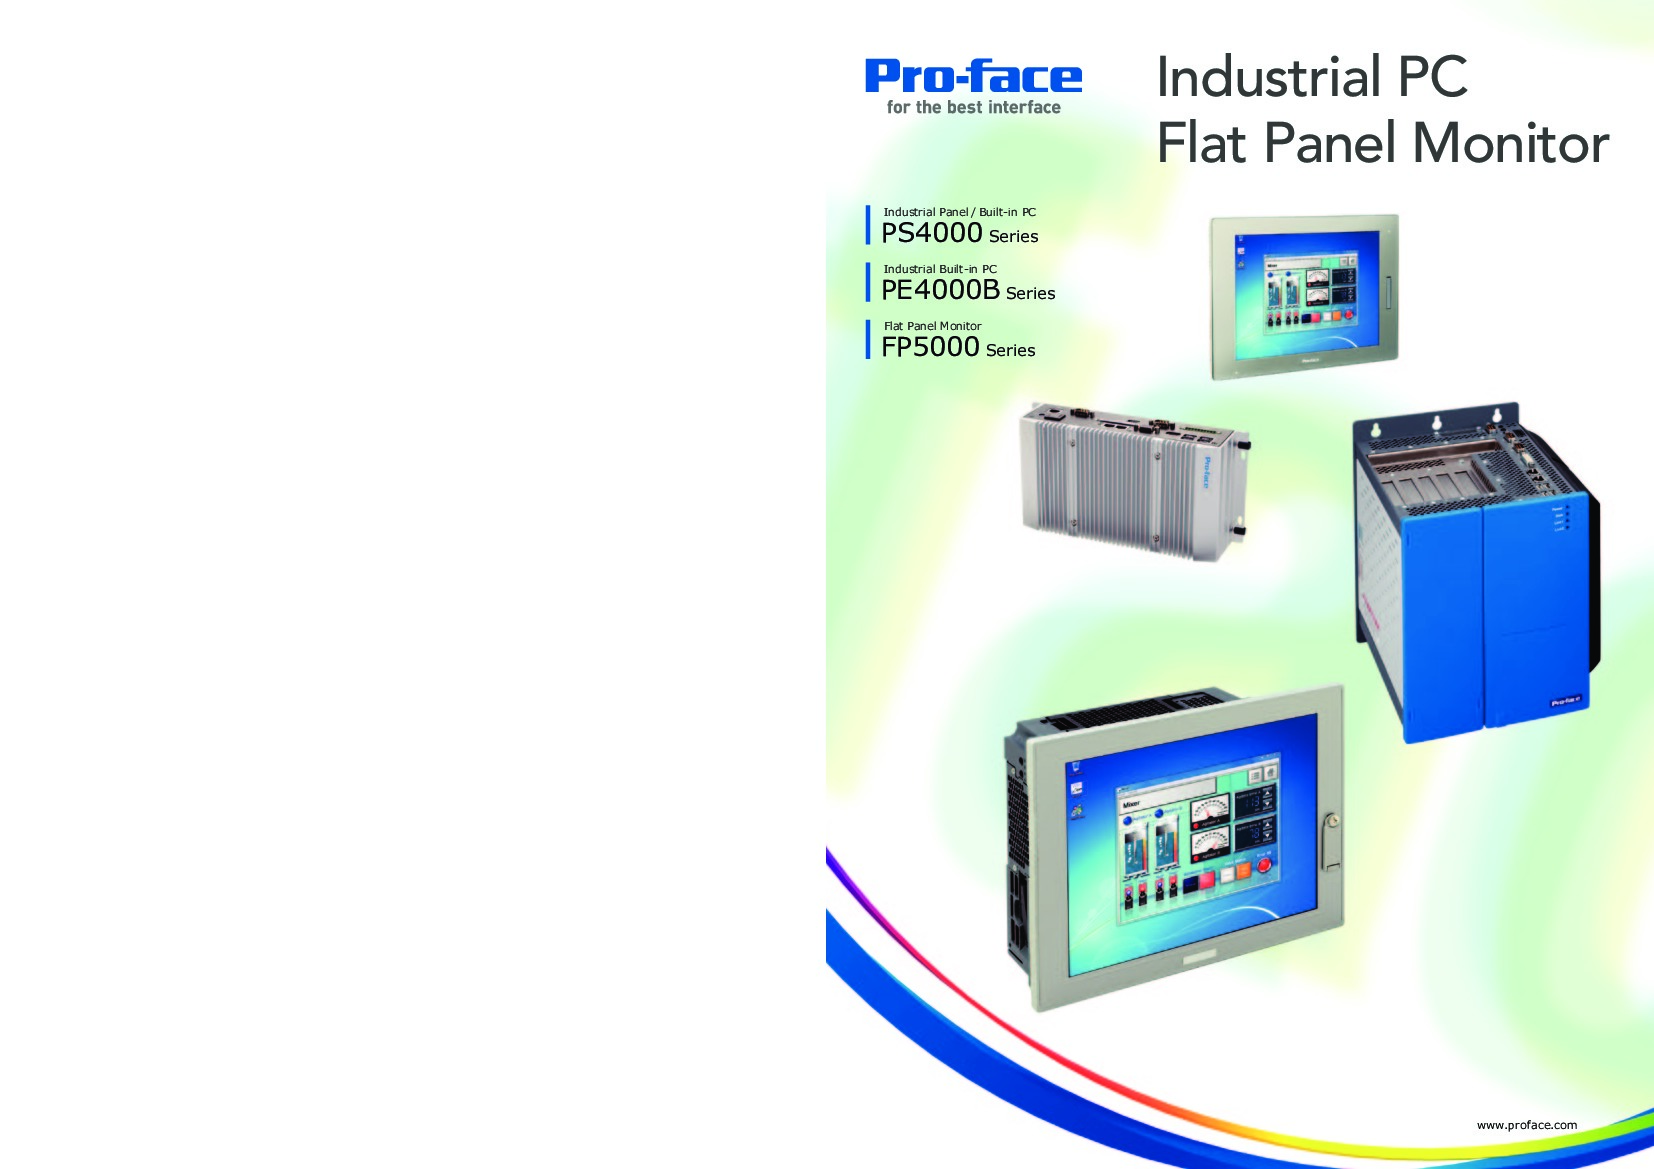 First Page Image of PFXPP161DA23P20N00 PS4000 Series Pro-Face Catalog.pdf